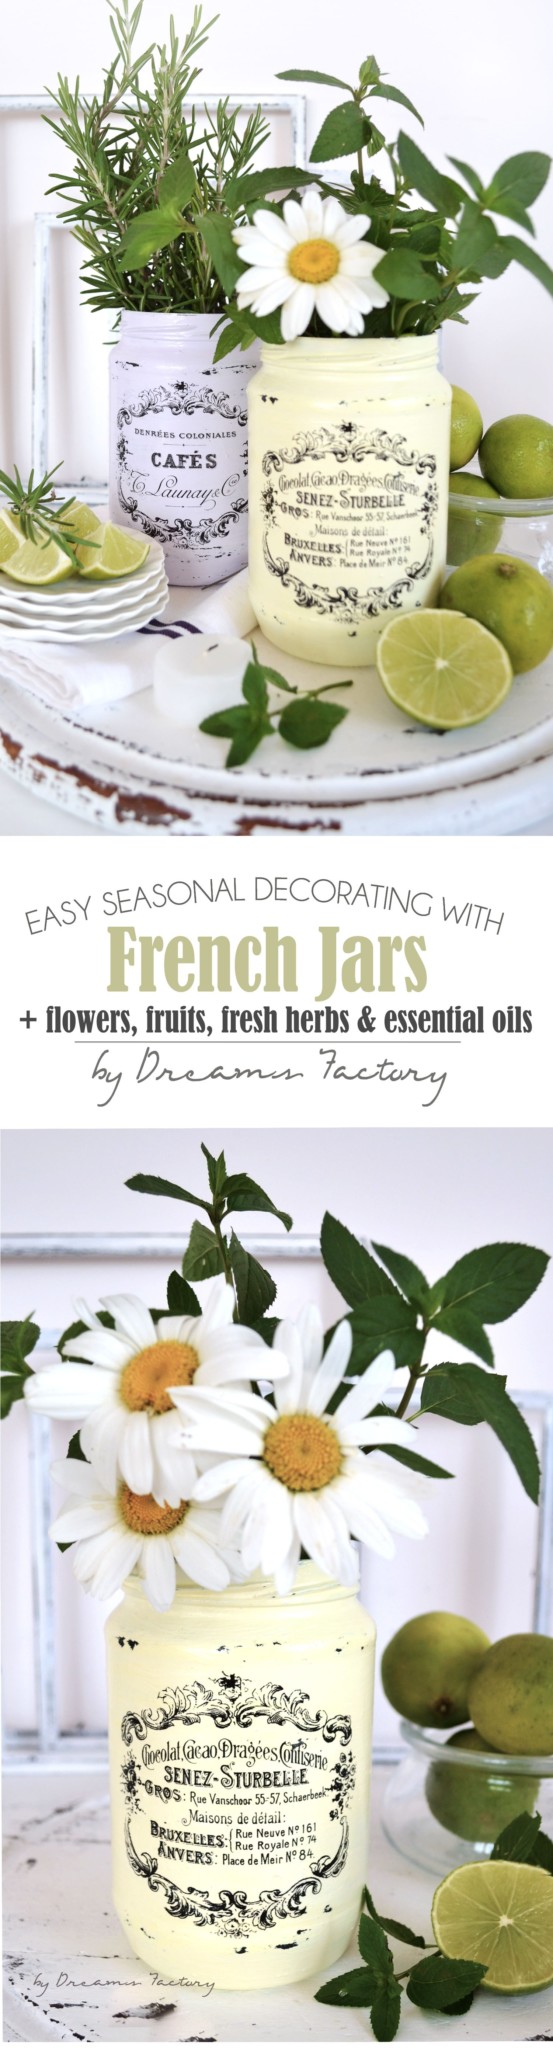 Easy Seasonal Decorating with French Jars, flowers, fruits, fresh herbs and essential oils for the most amazing vignettes for any season - Dreams Factory